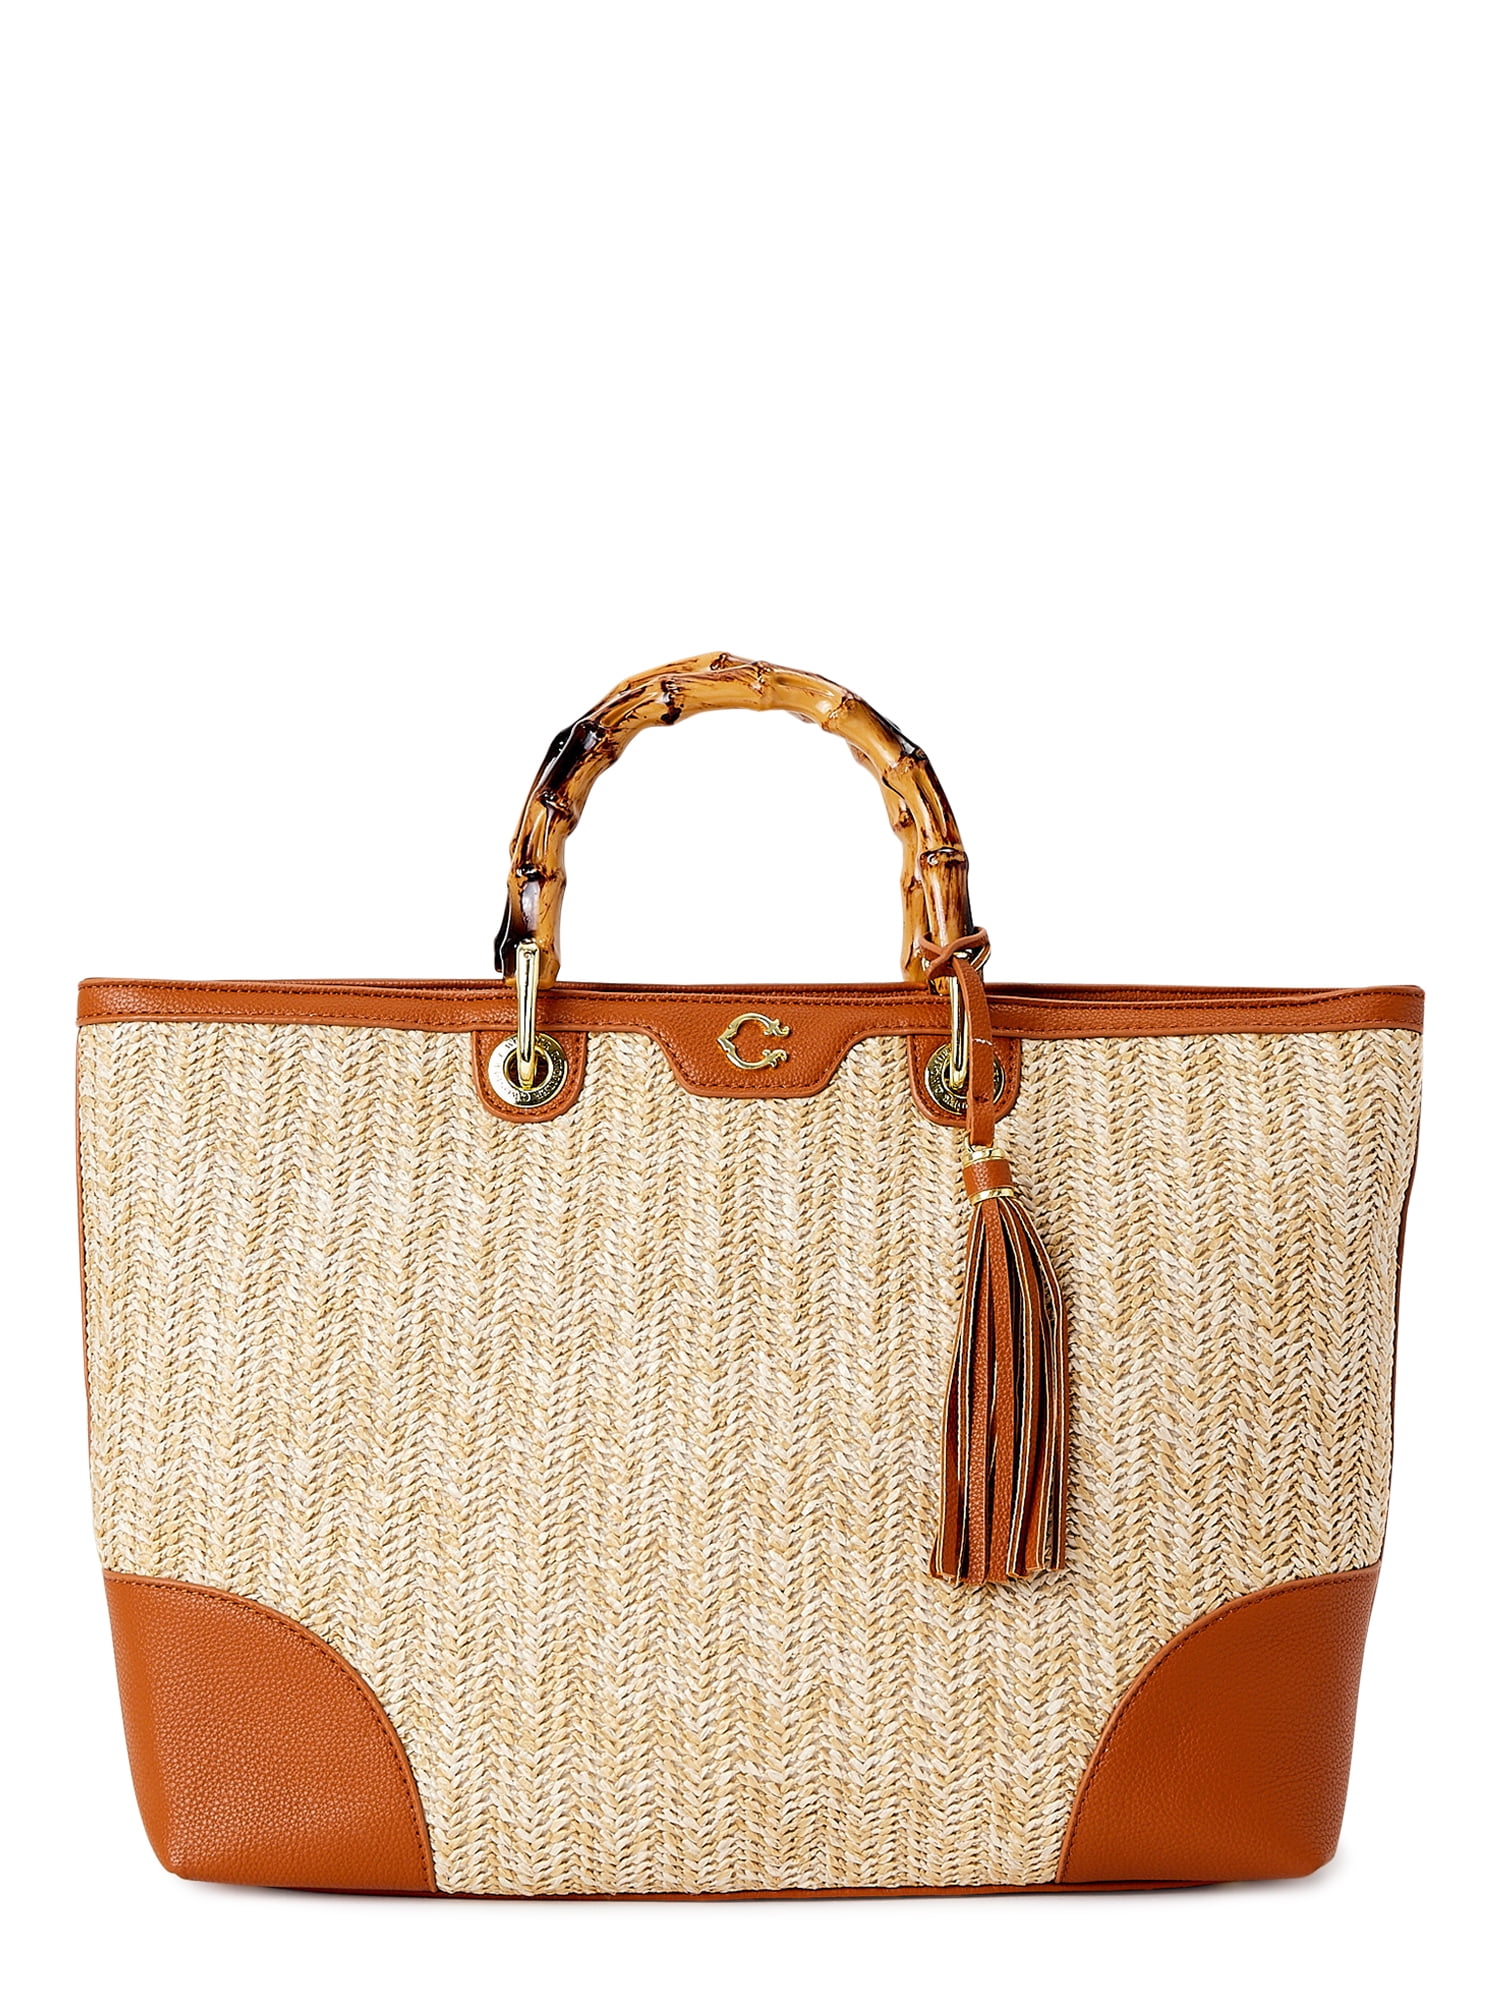 C. Wonder Women's Adult Juno Faux Straw Tote Bag with Bamboo-Look